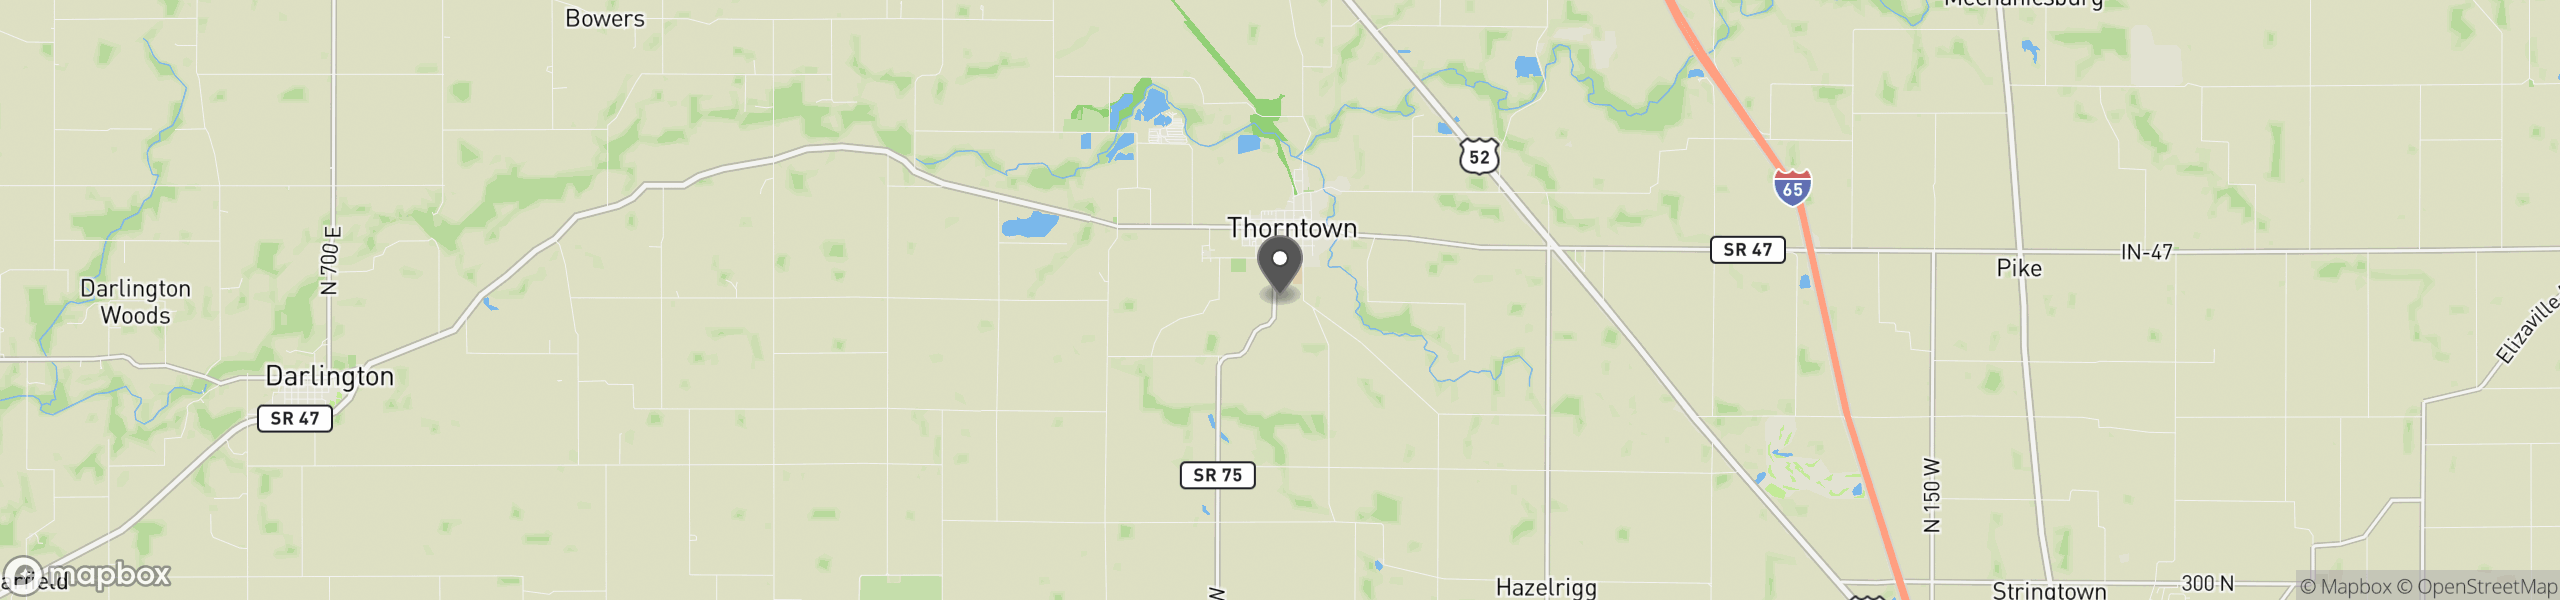 Thorntown, IN